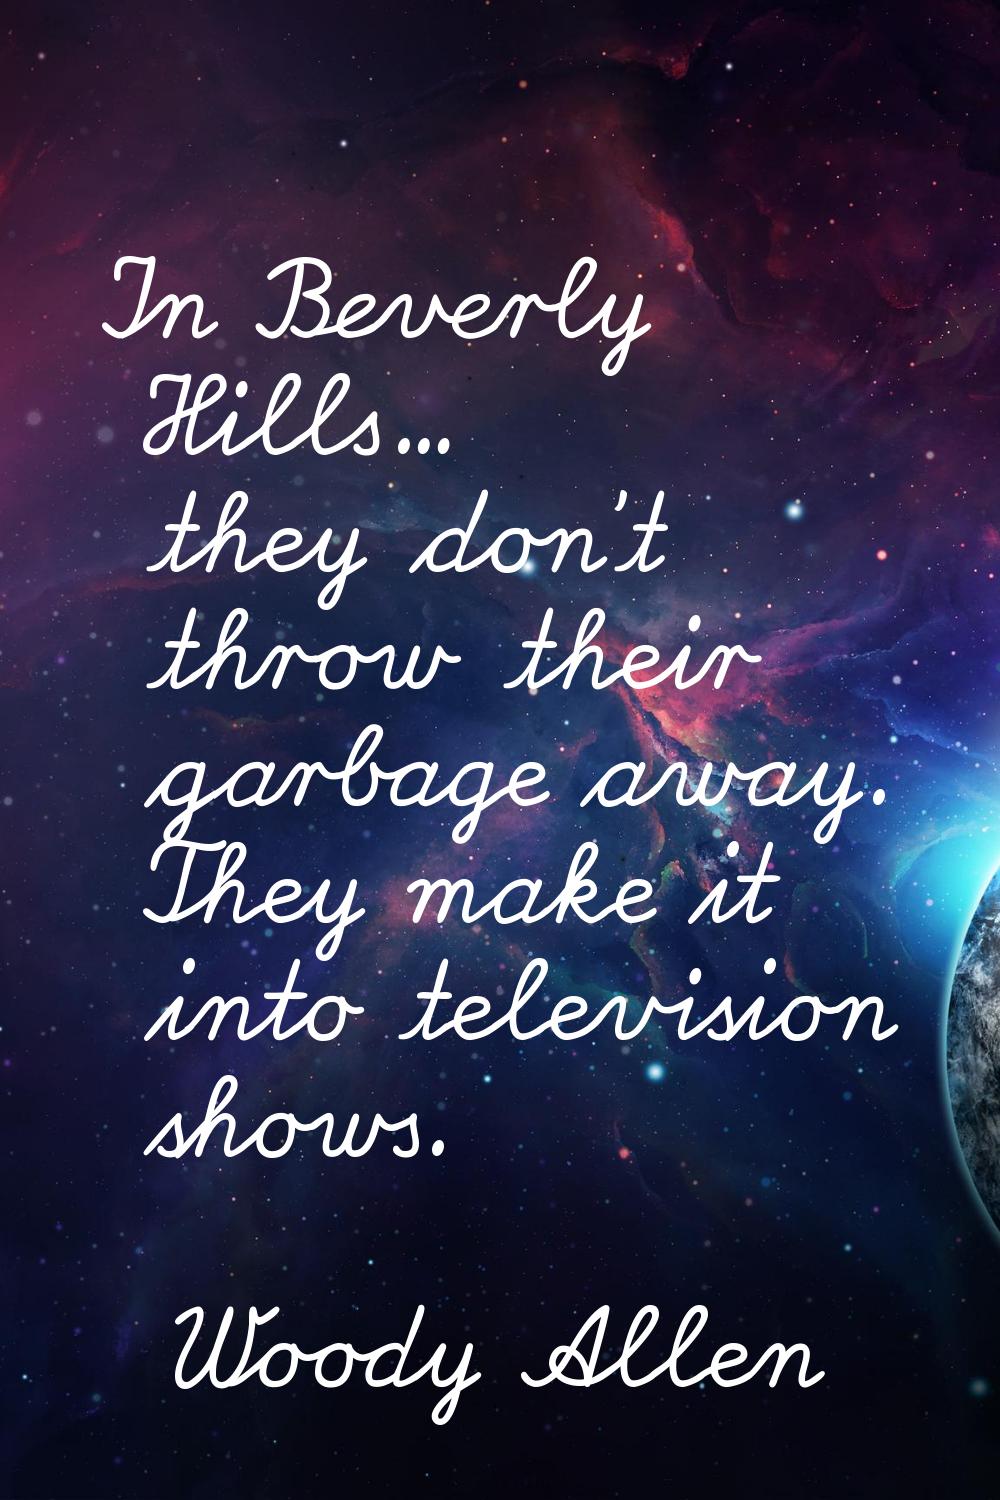 In Beverly Hills... they don't throw their garbage away. They make it into television shows.